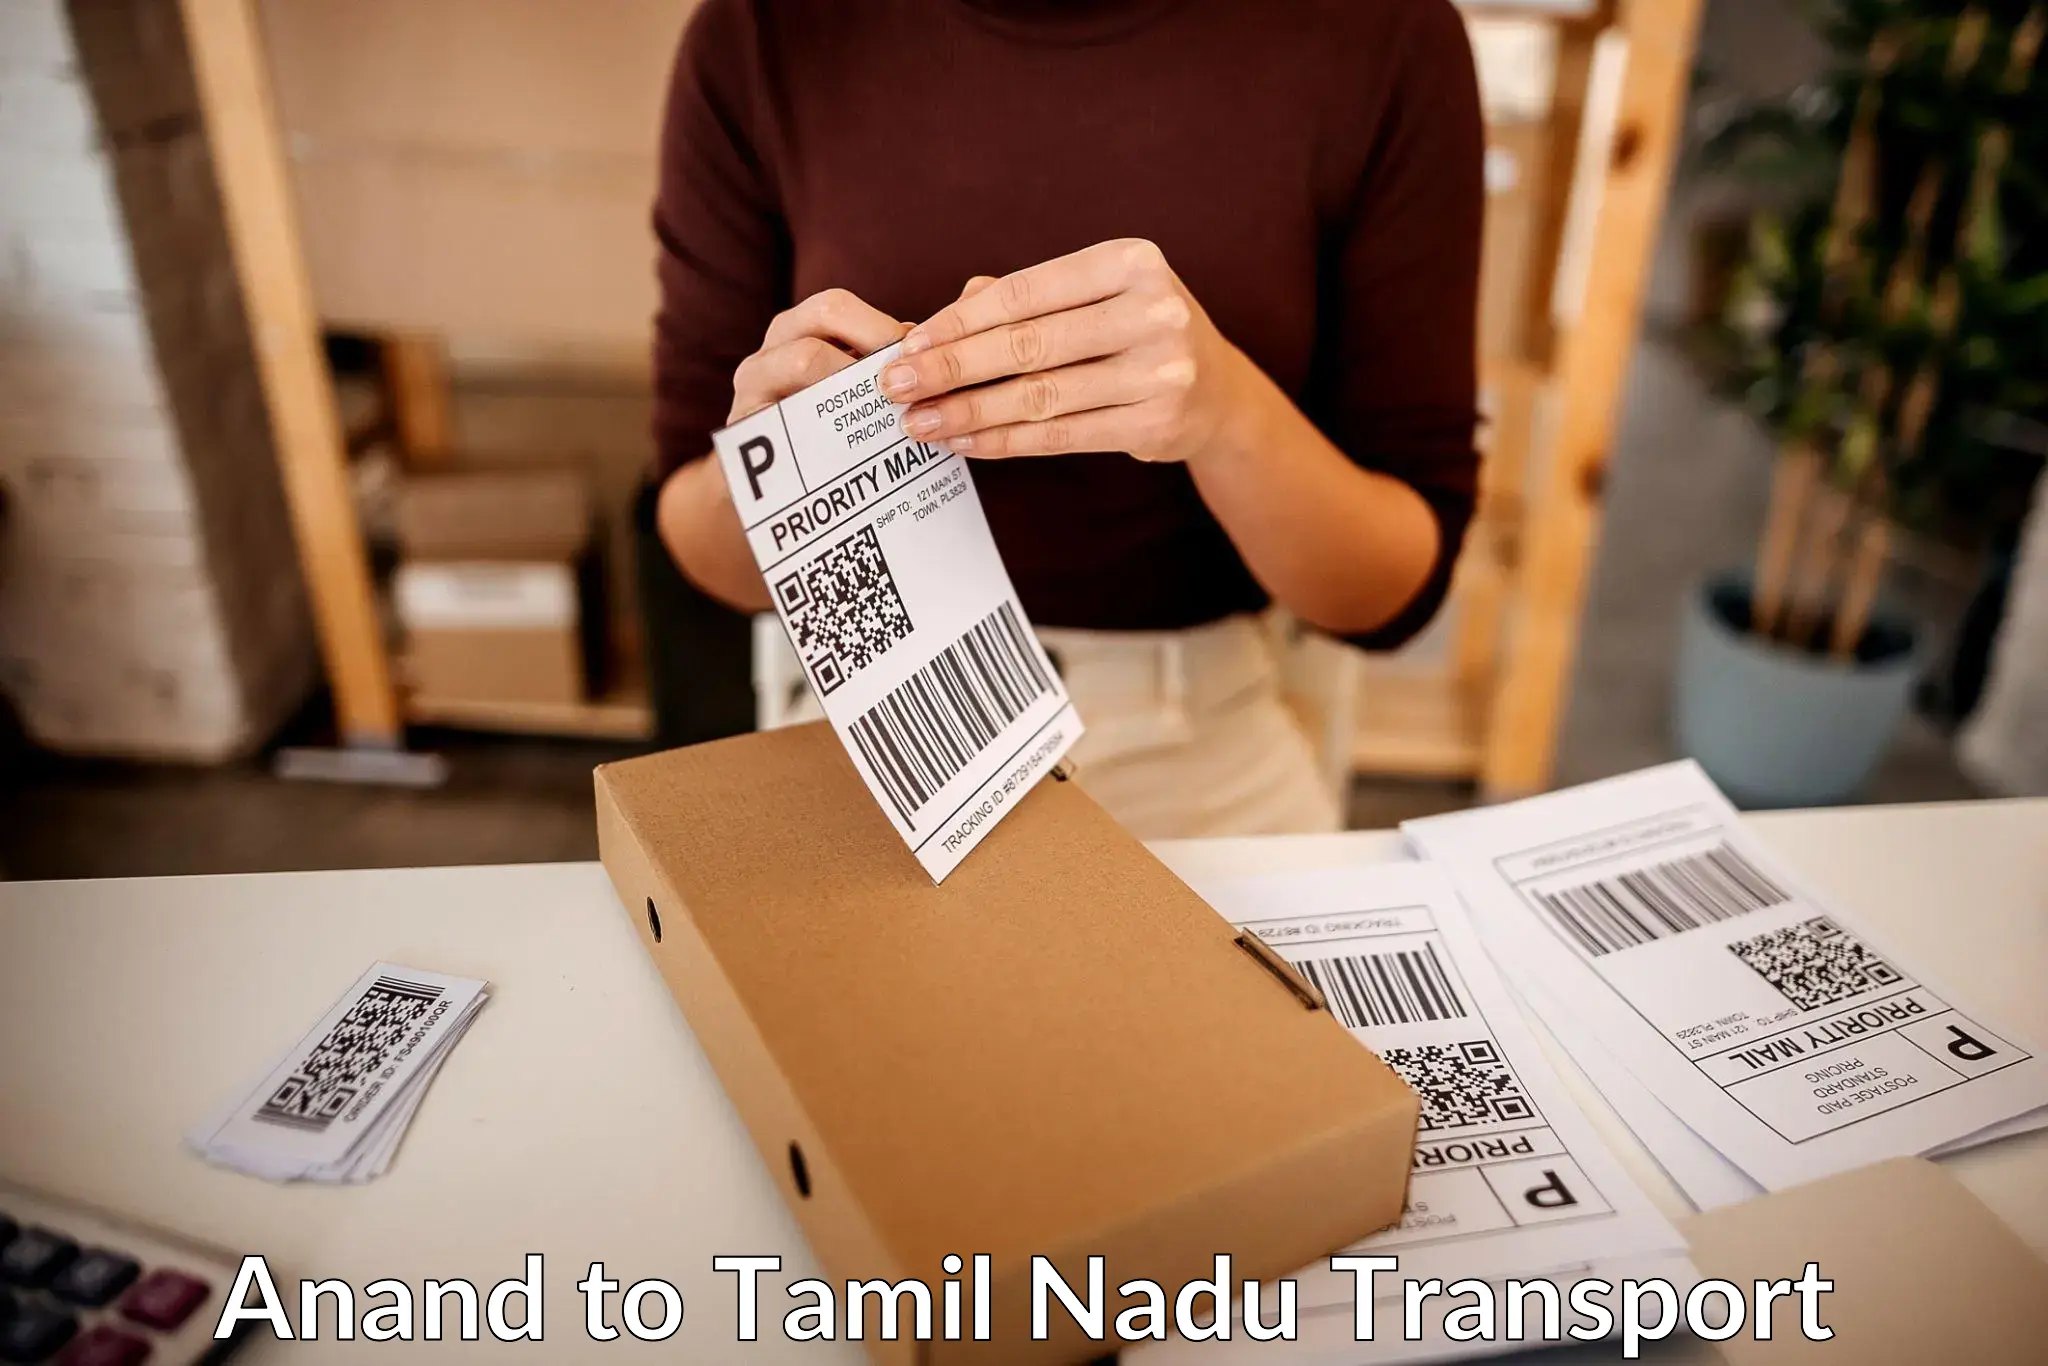 Parcel transport services in Anand to Shanmugha Arts Science Technology and Research Academy Thanjavur